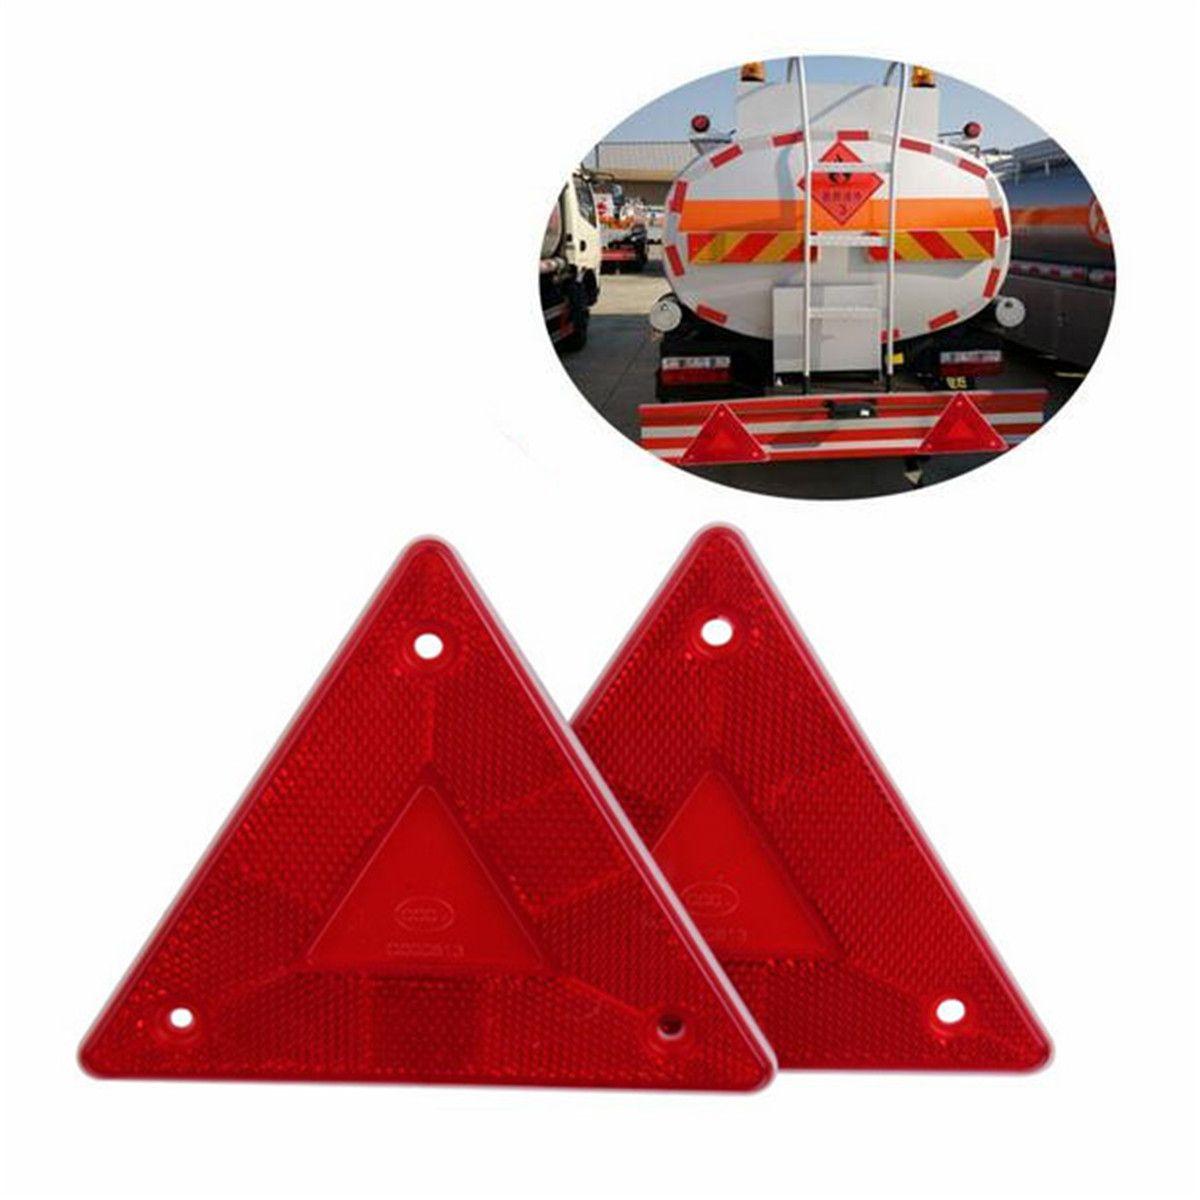 Red Triangular Automotive Logo - Details about Pairs Red Triangular Side Red Reflectors For Rear Triangle  Truck Trailer Caravan